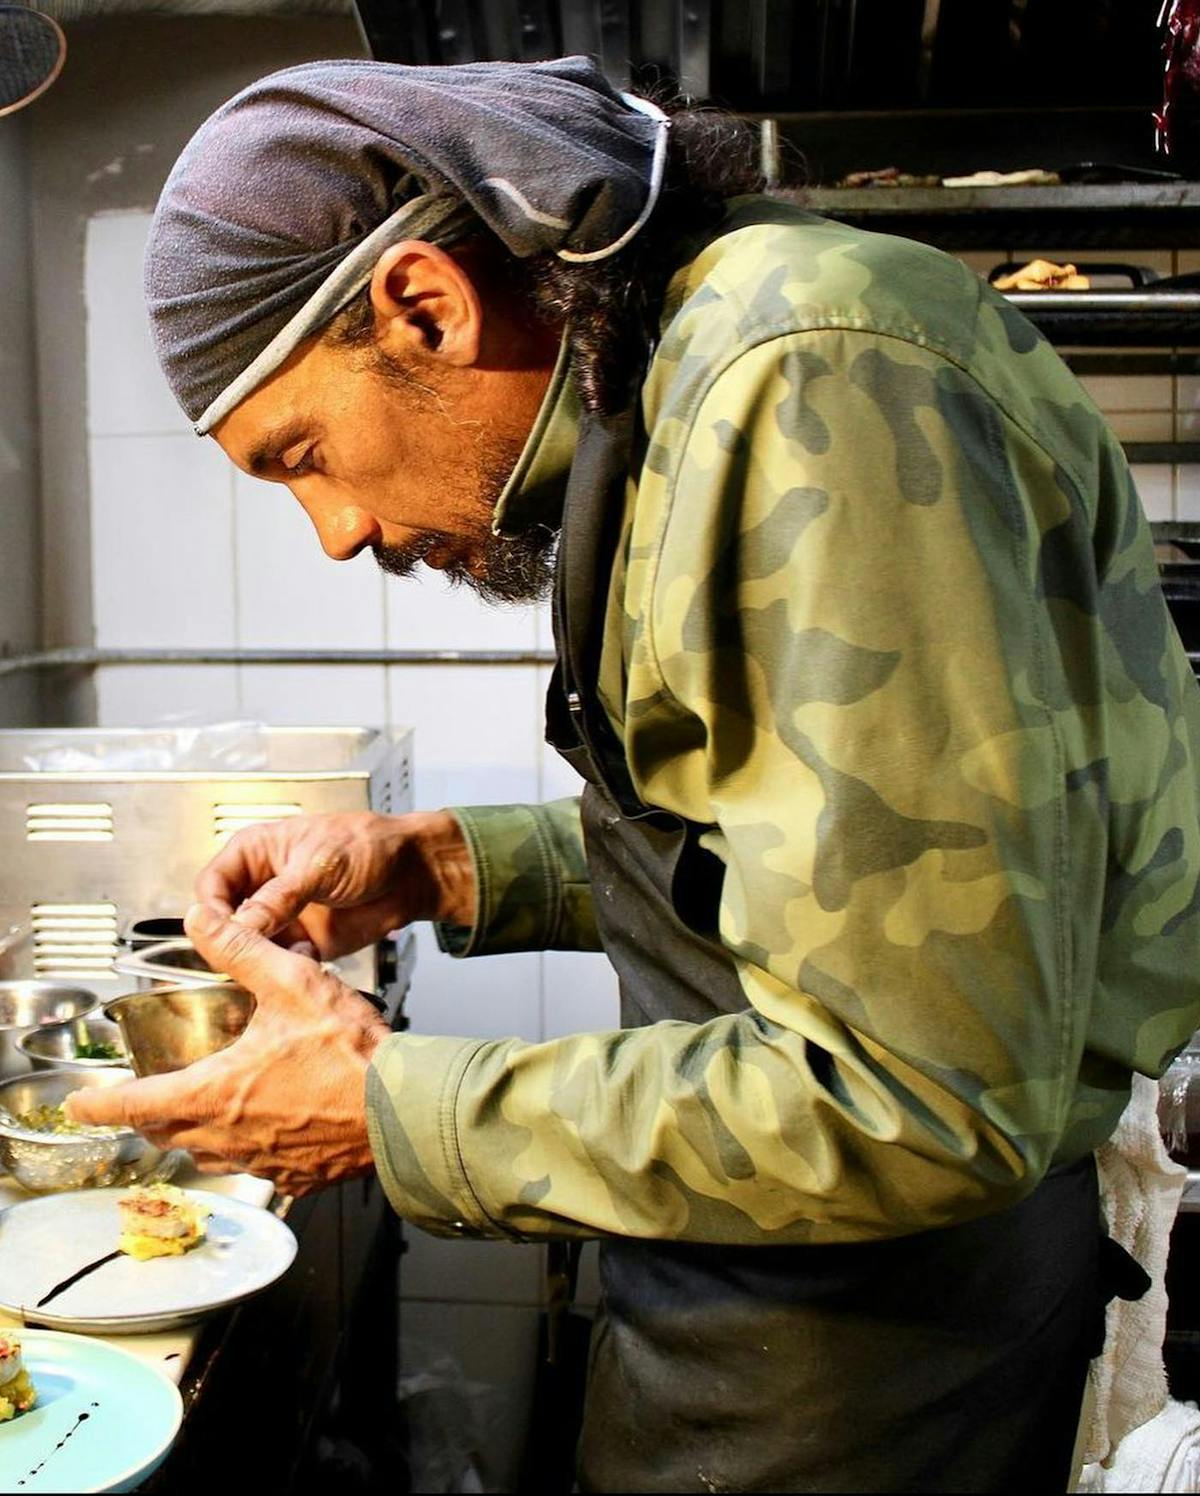 a man cooking in a kitchen preparing food